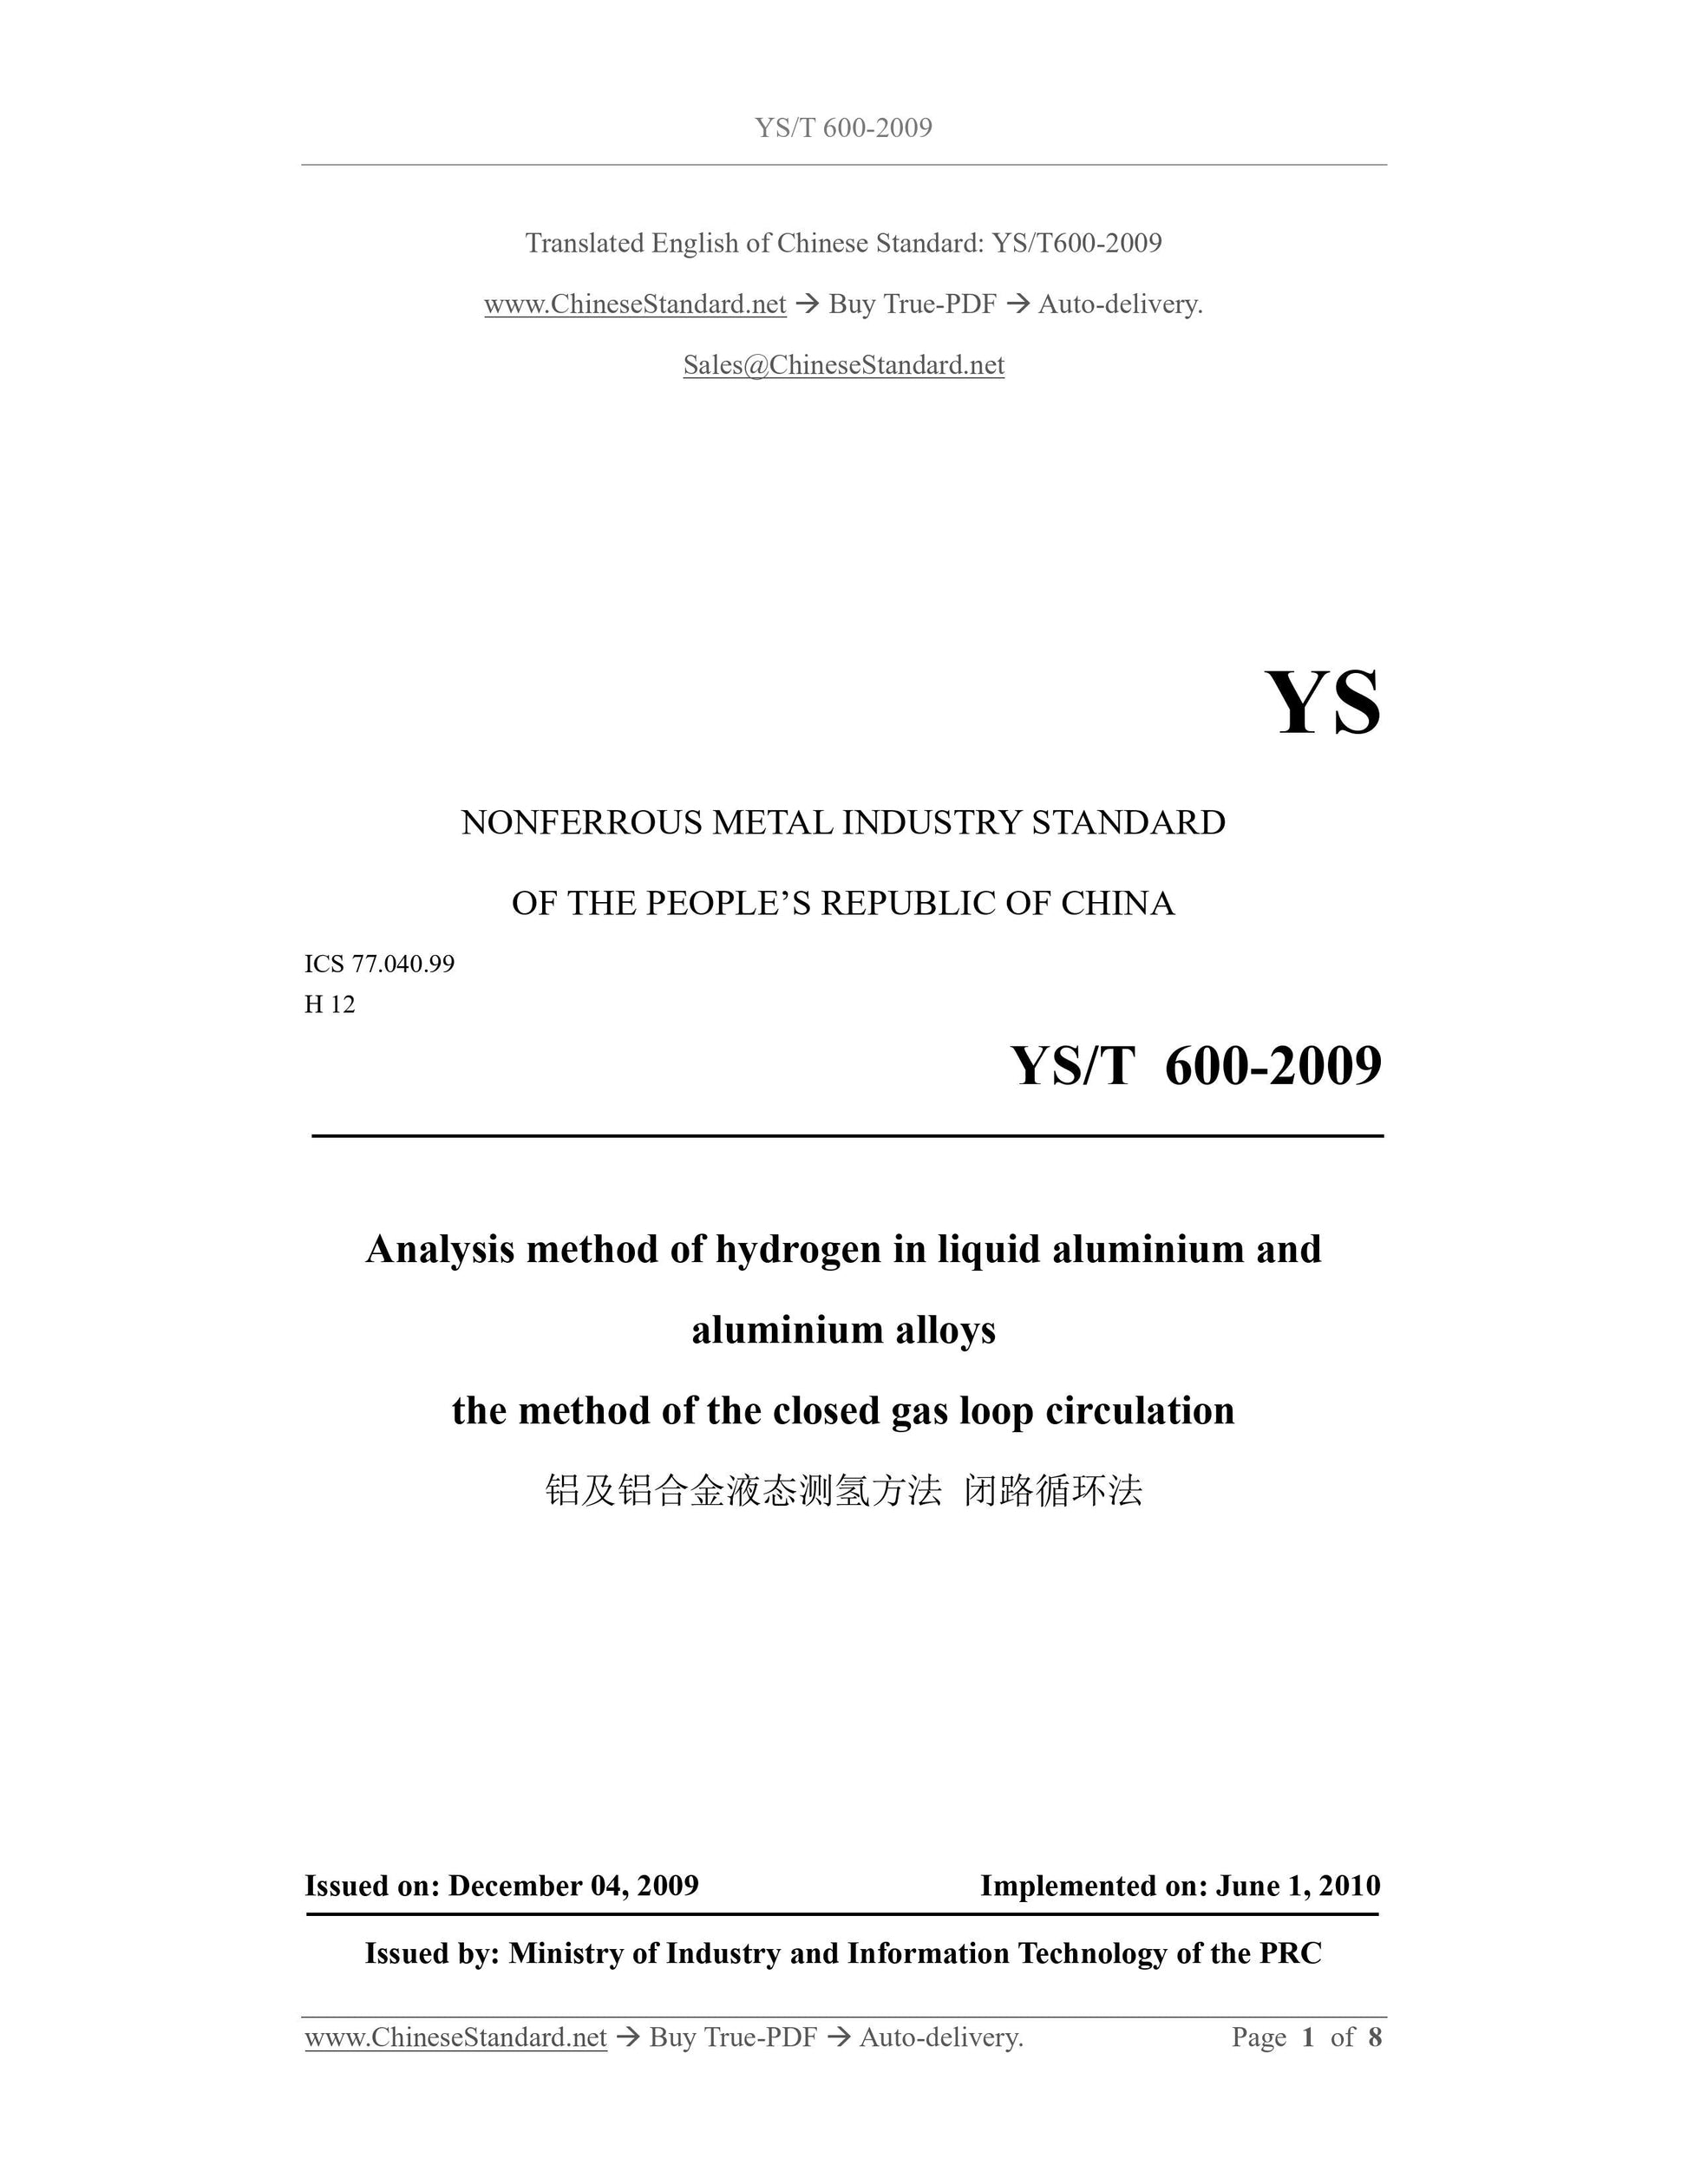 YS/T 600-2009 Page 1